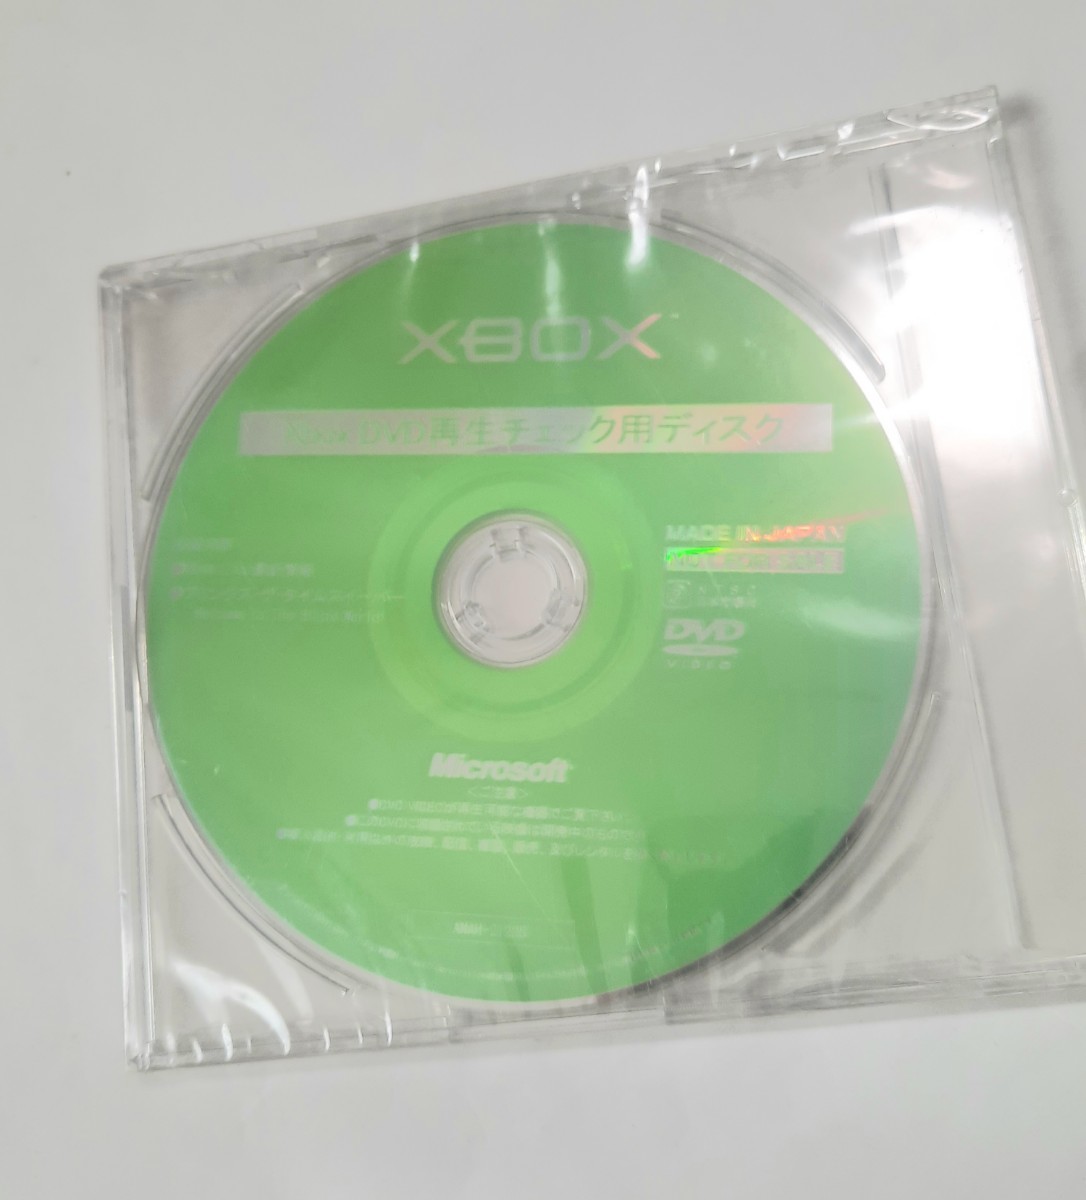 Xbox DVD reproduction for check disk unopened goods 015